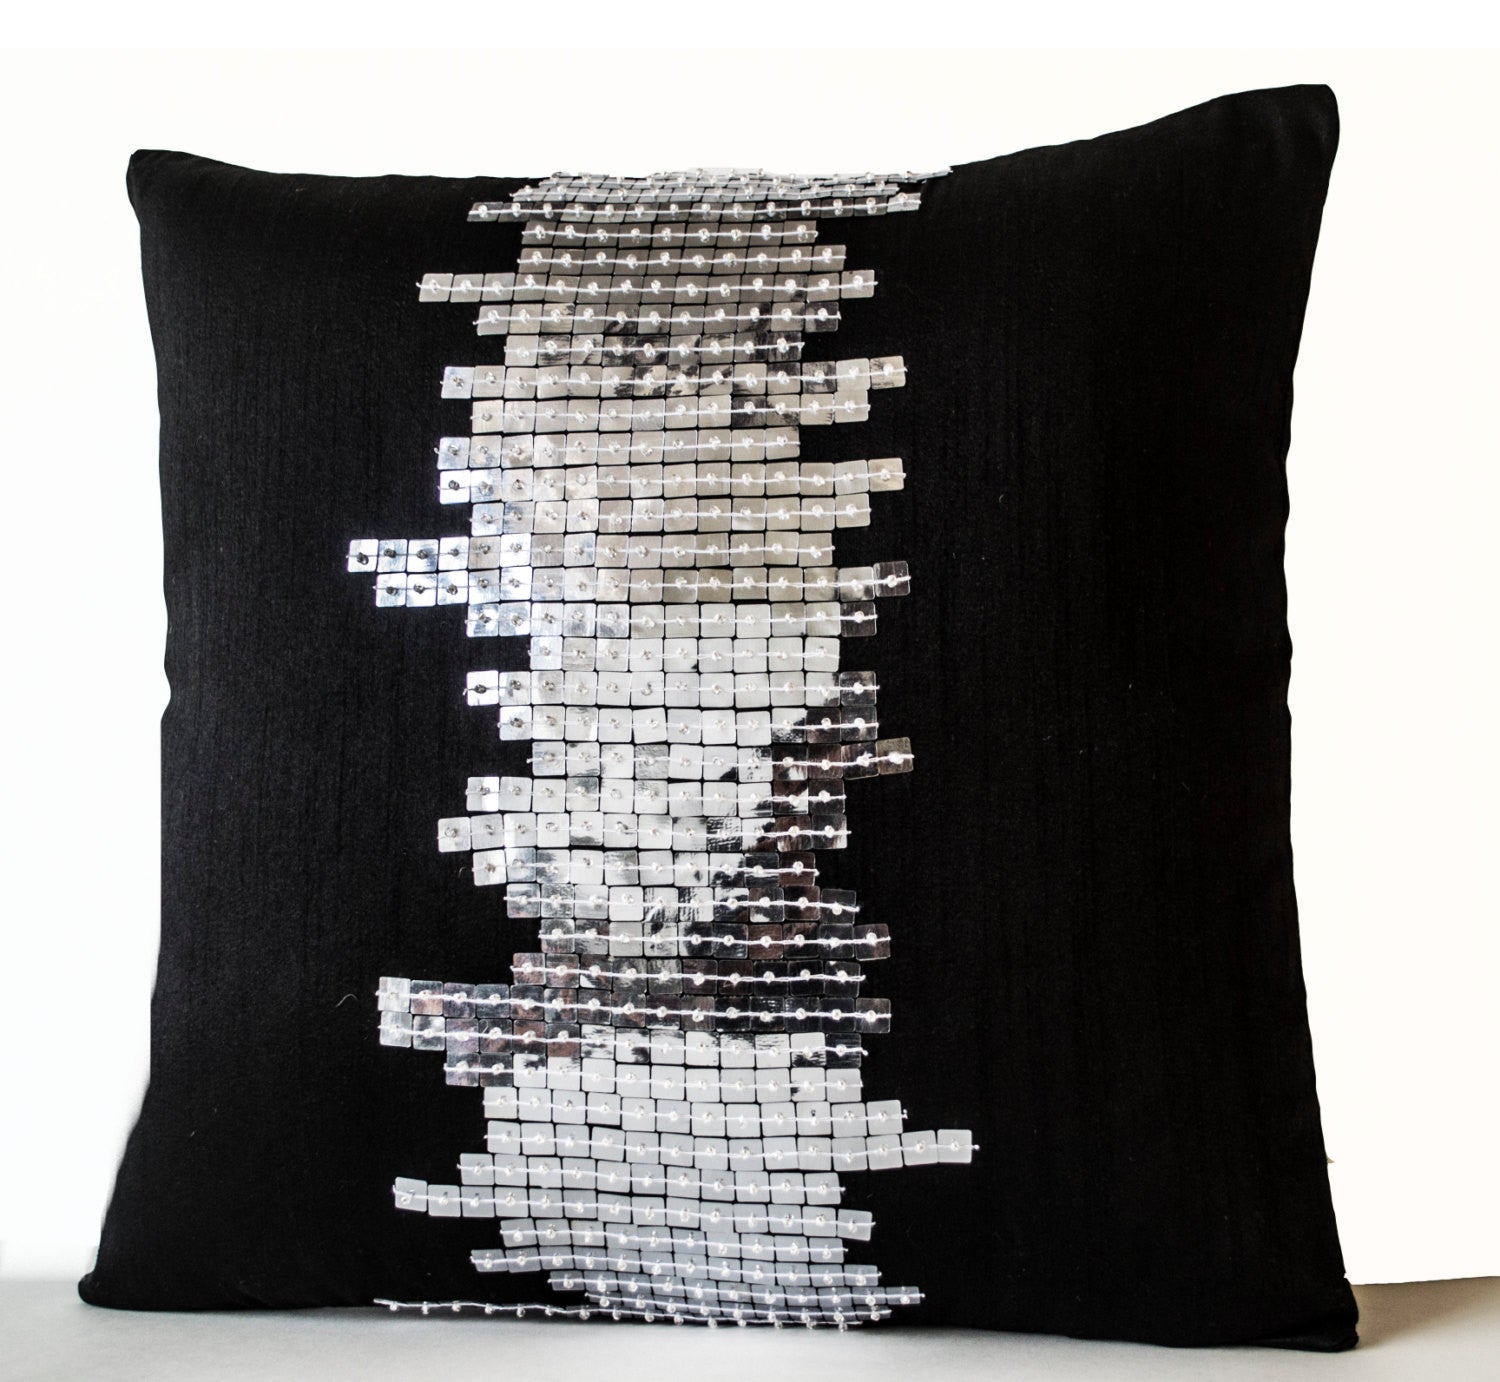  Handmade cushion covers with silver sequin